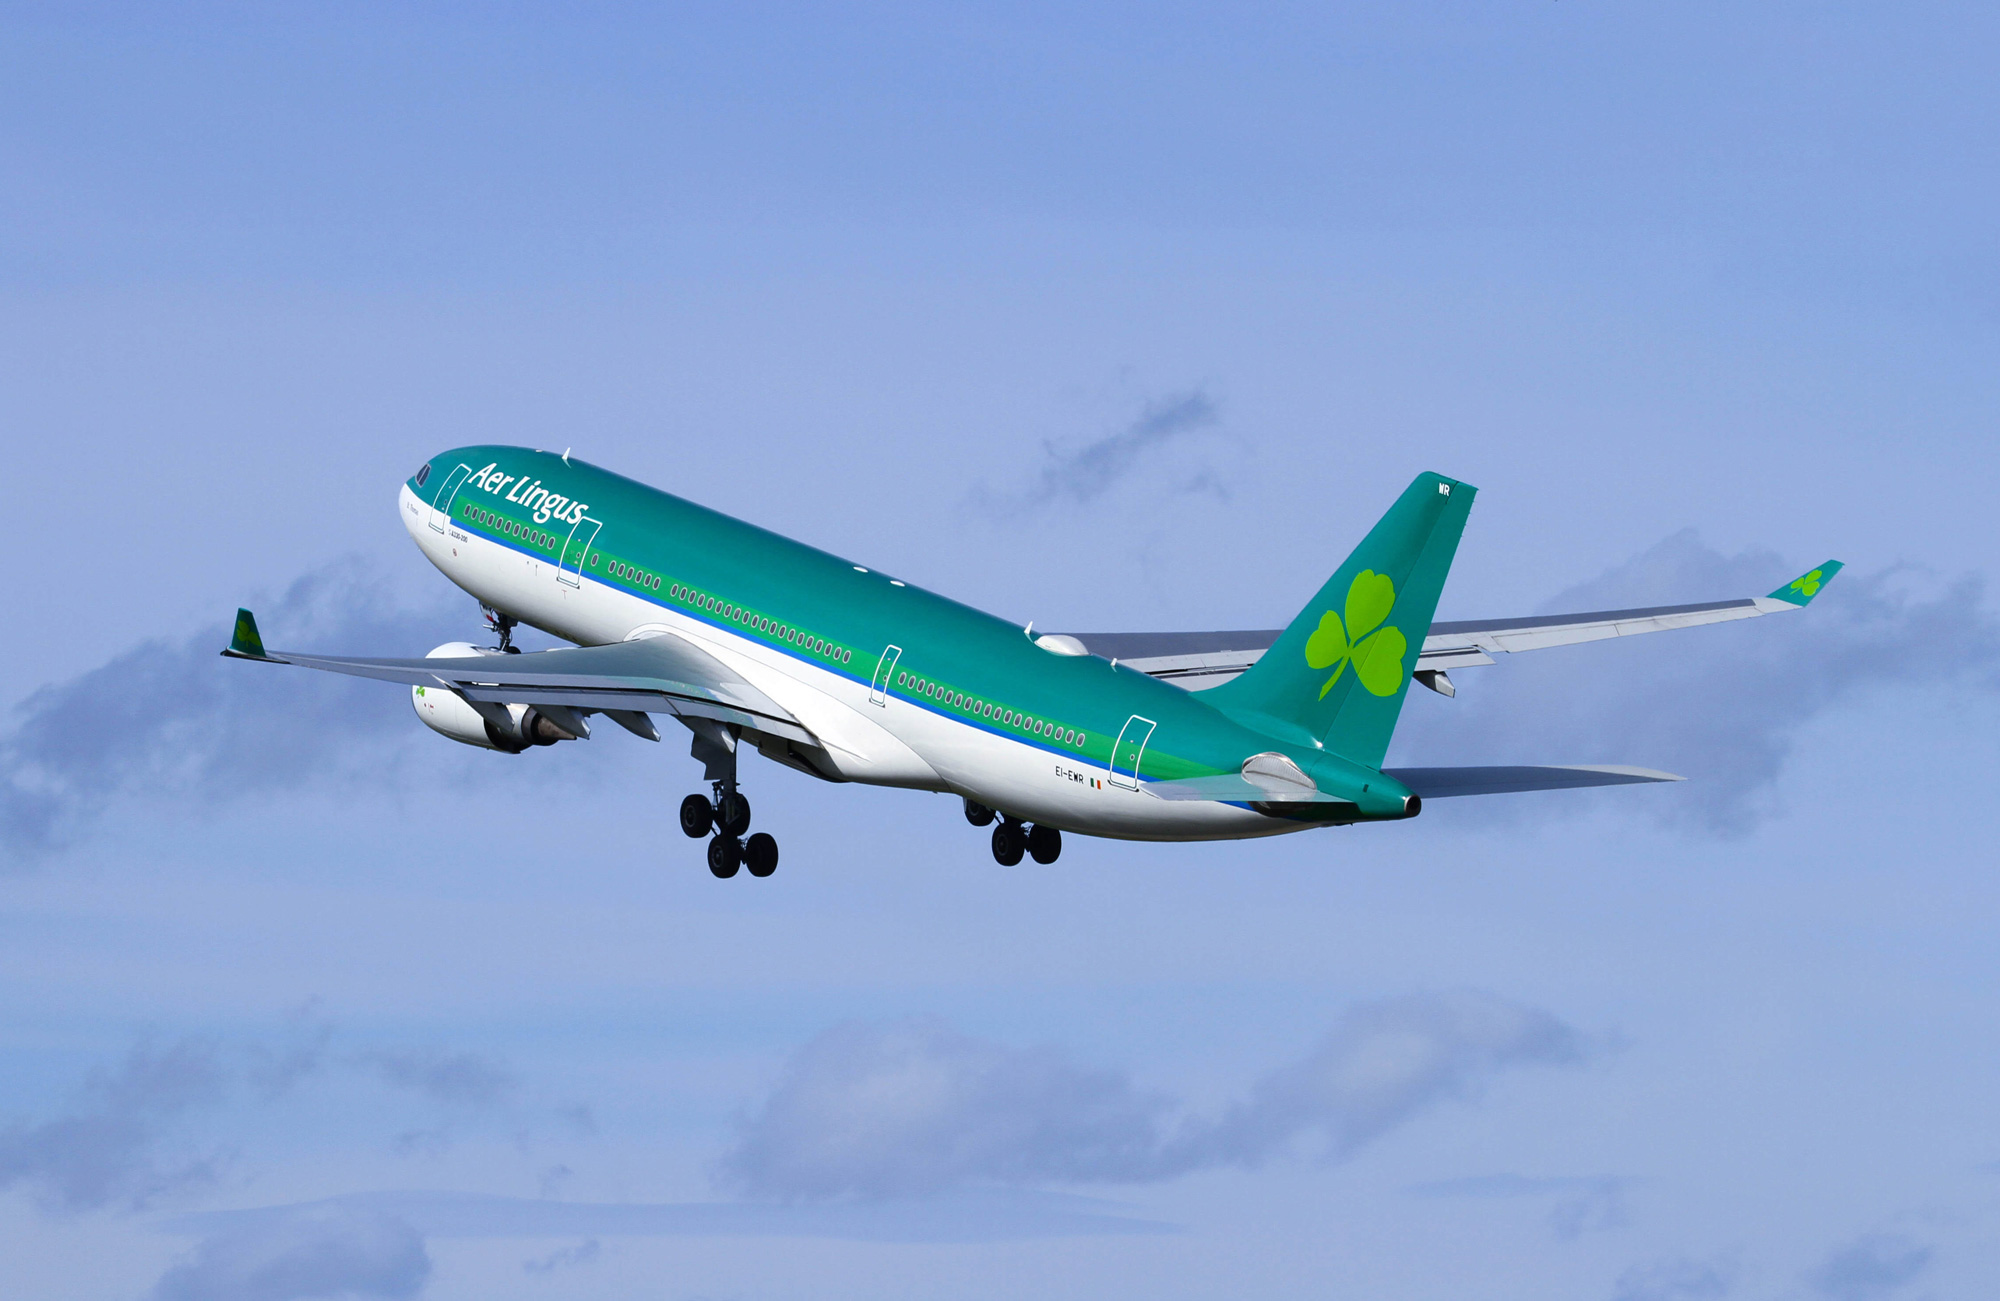 New Logo, Identity, and Livery for Aer Lingus by Lippincott